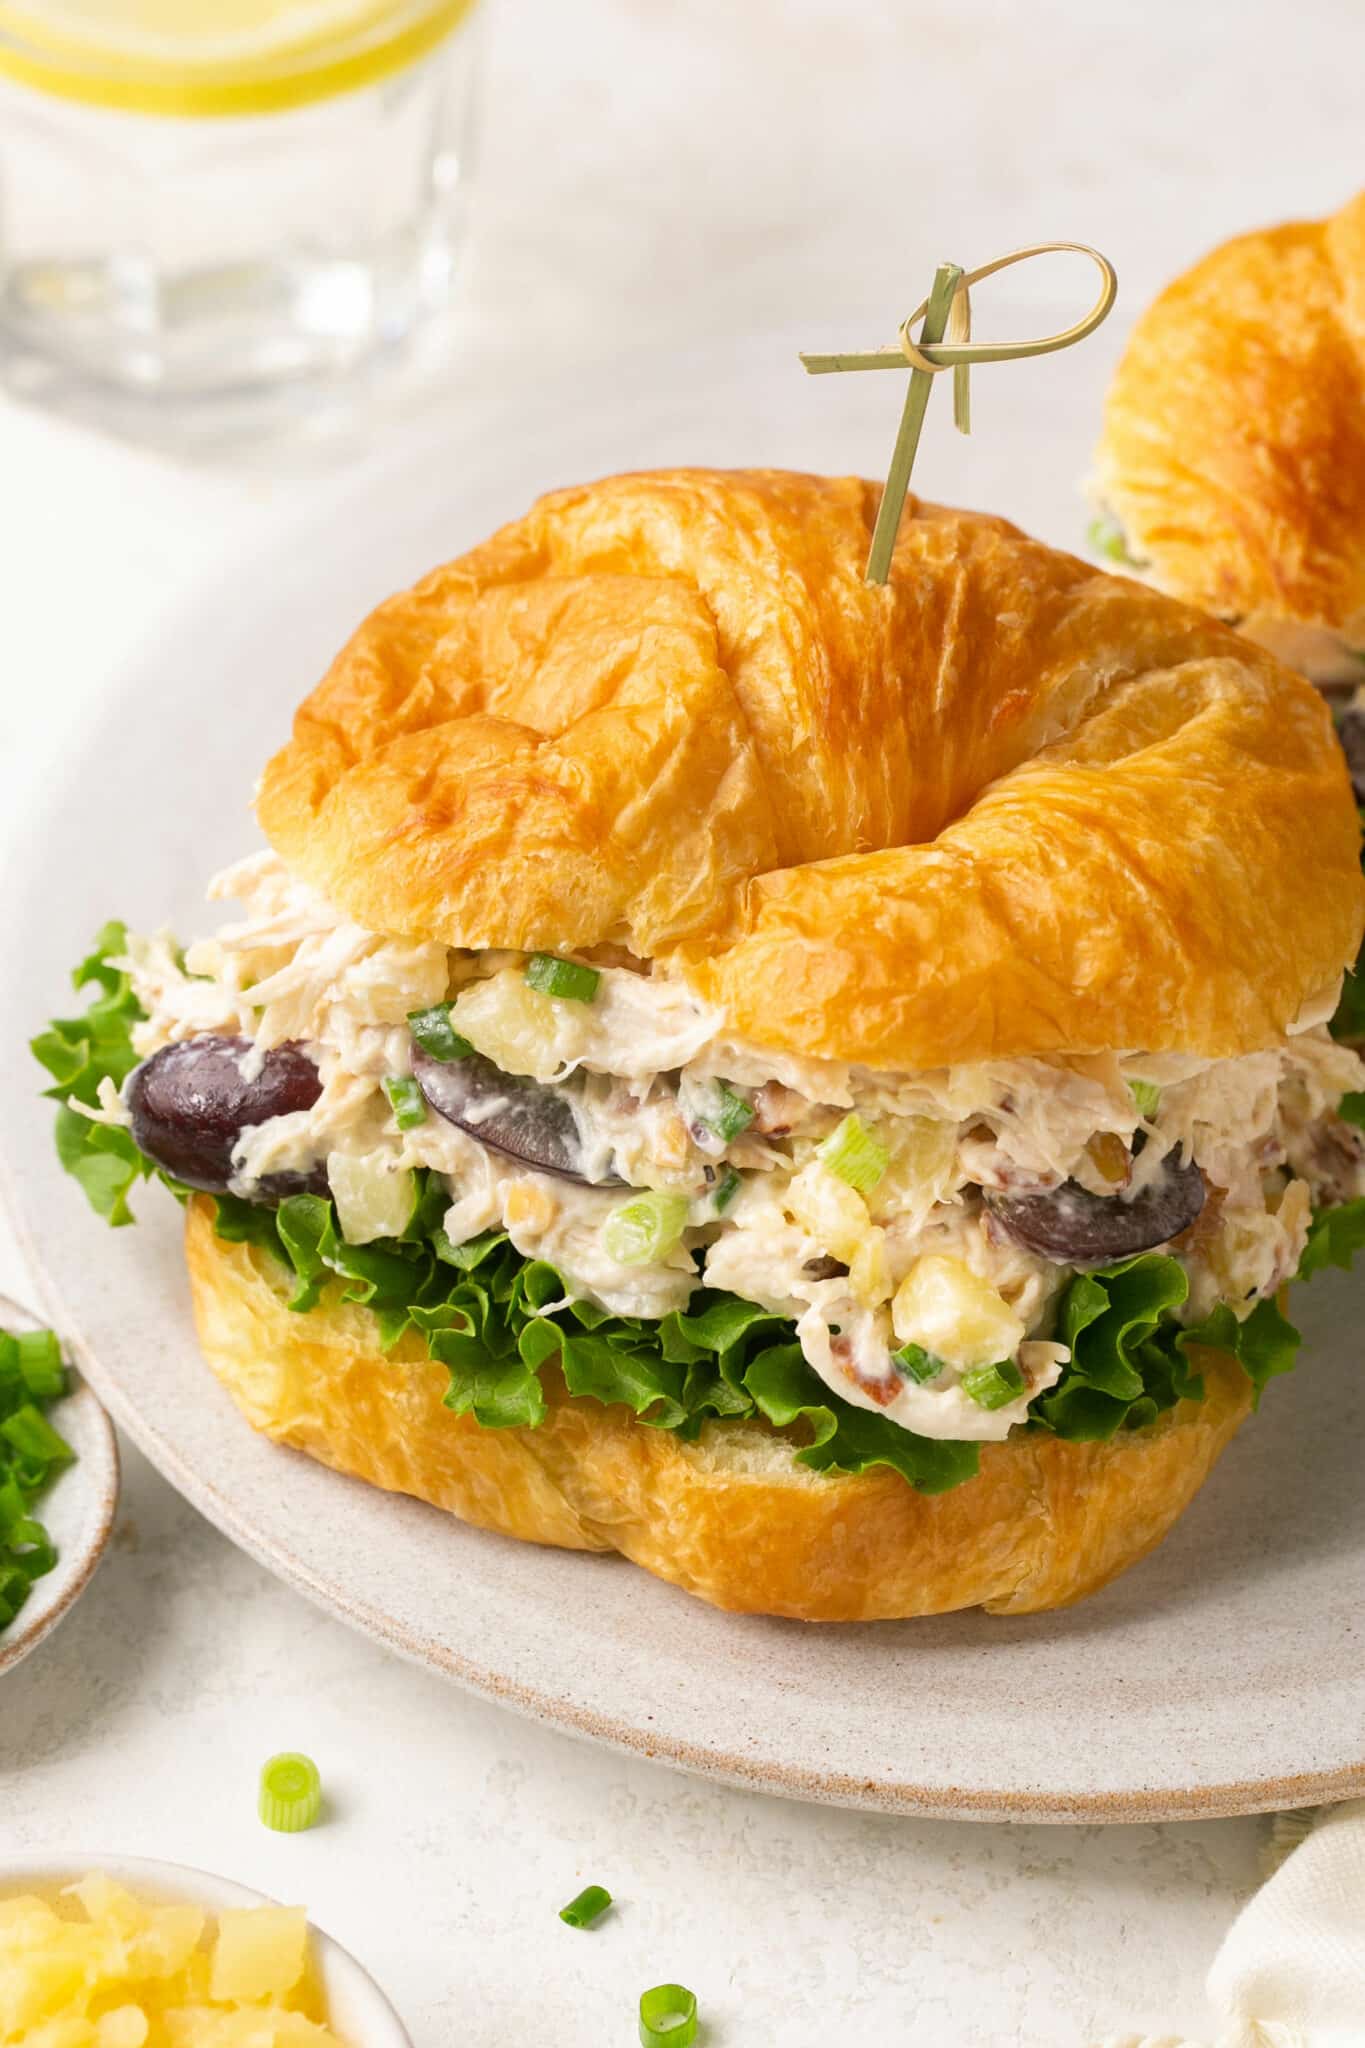 Chicken salad served on a croissant with lettuce.